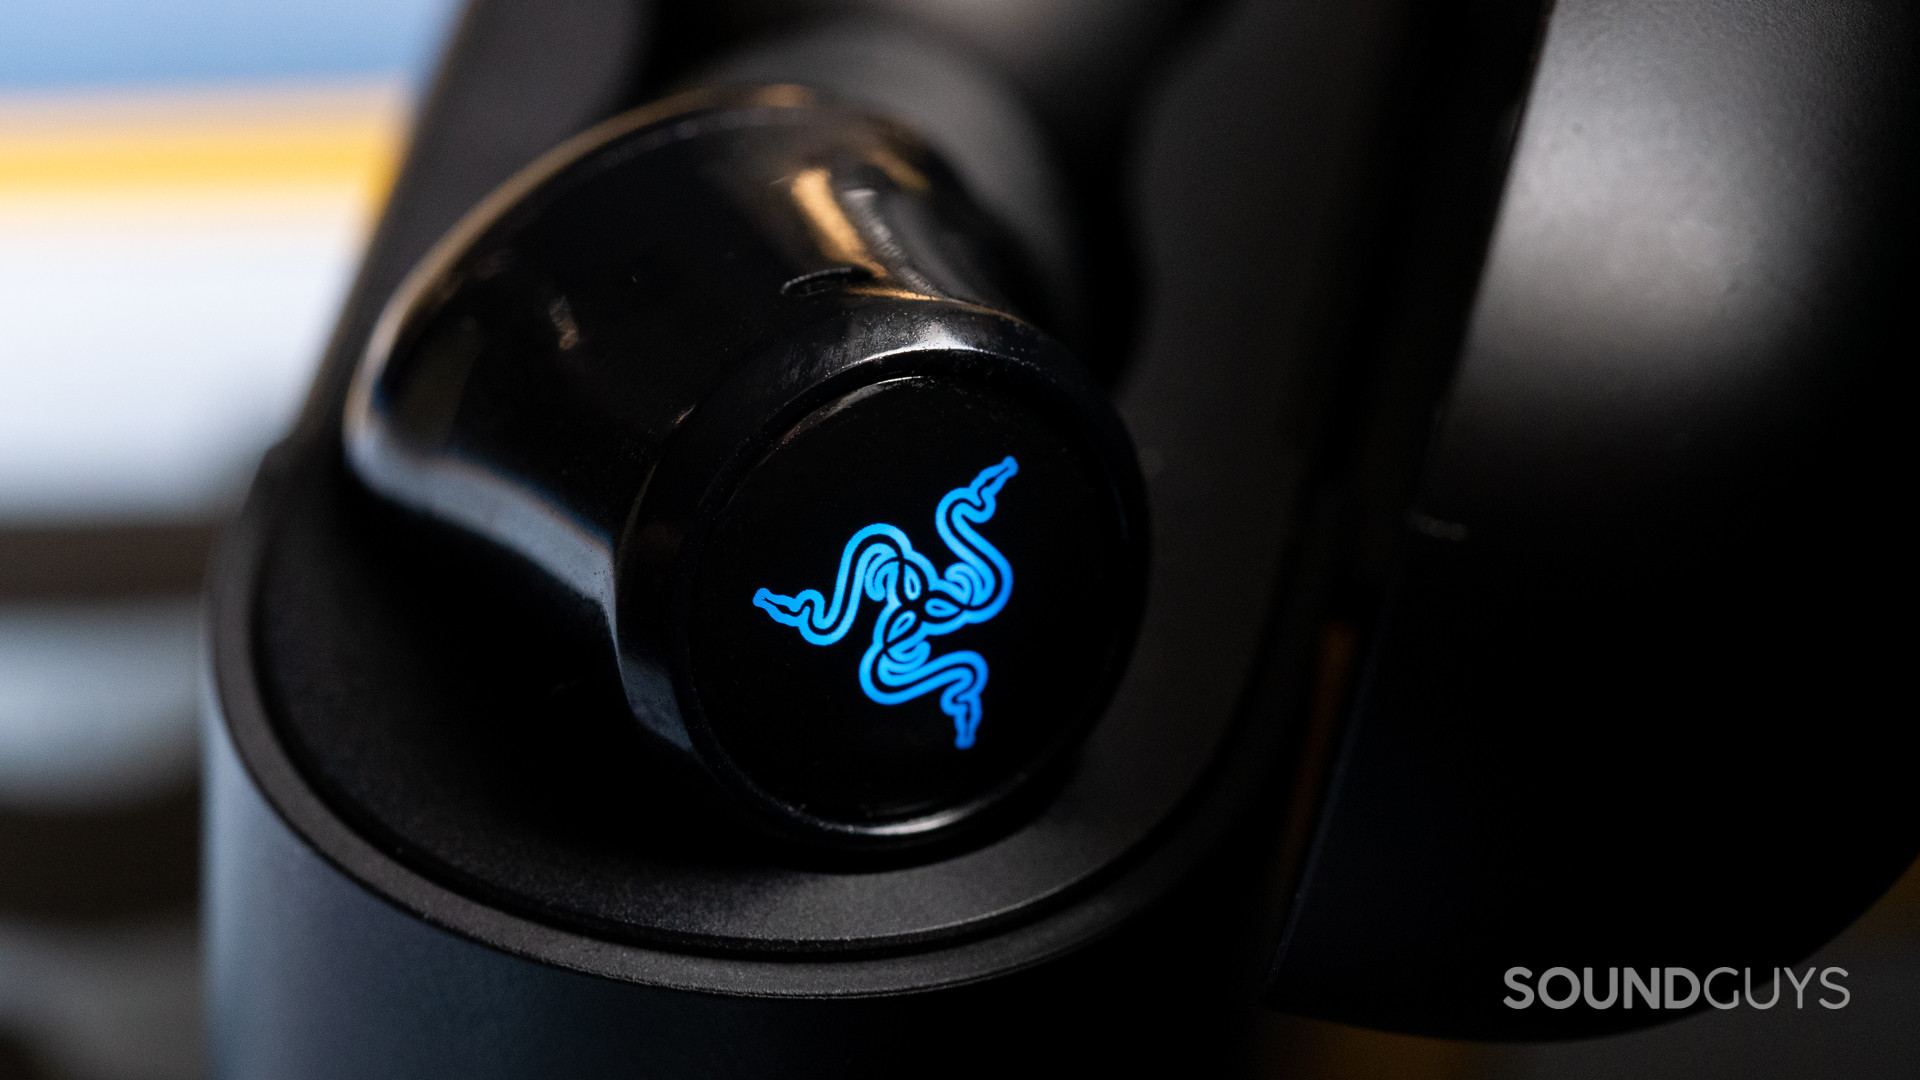 A photo of the RGB logo on the back of the Razer Hammerhead Pro Hyperspeed.